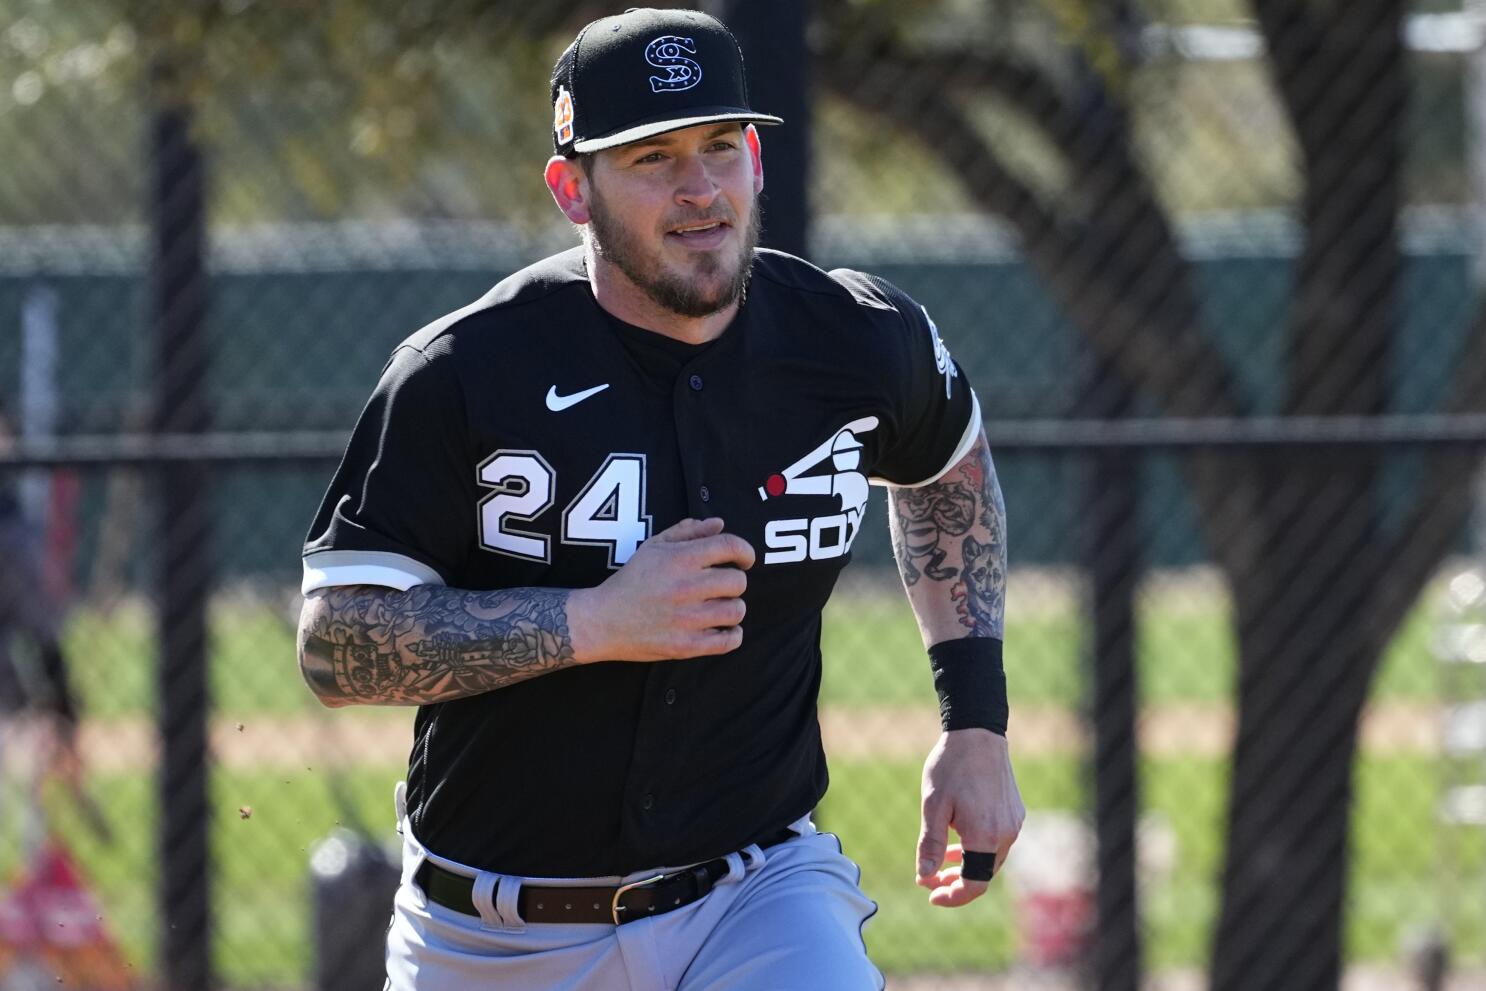 It's Time For White Sox To Get Serious About Dealing Starters